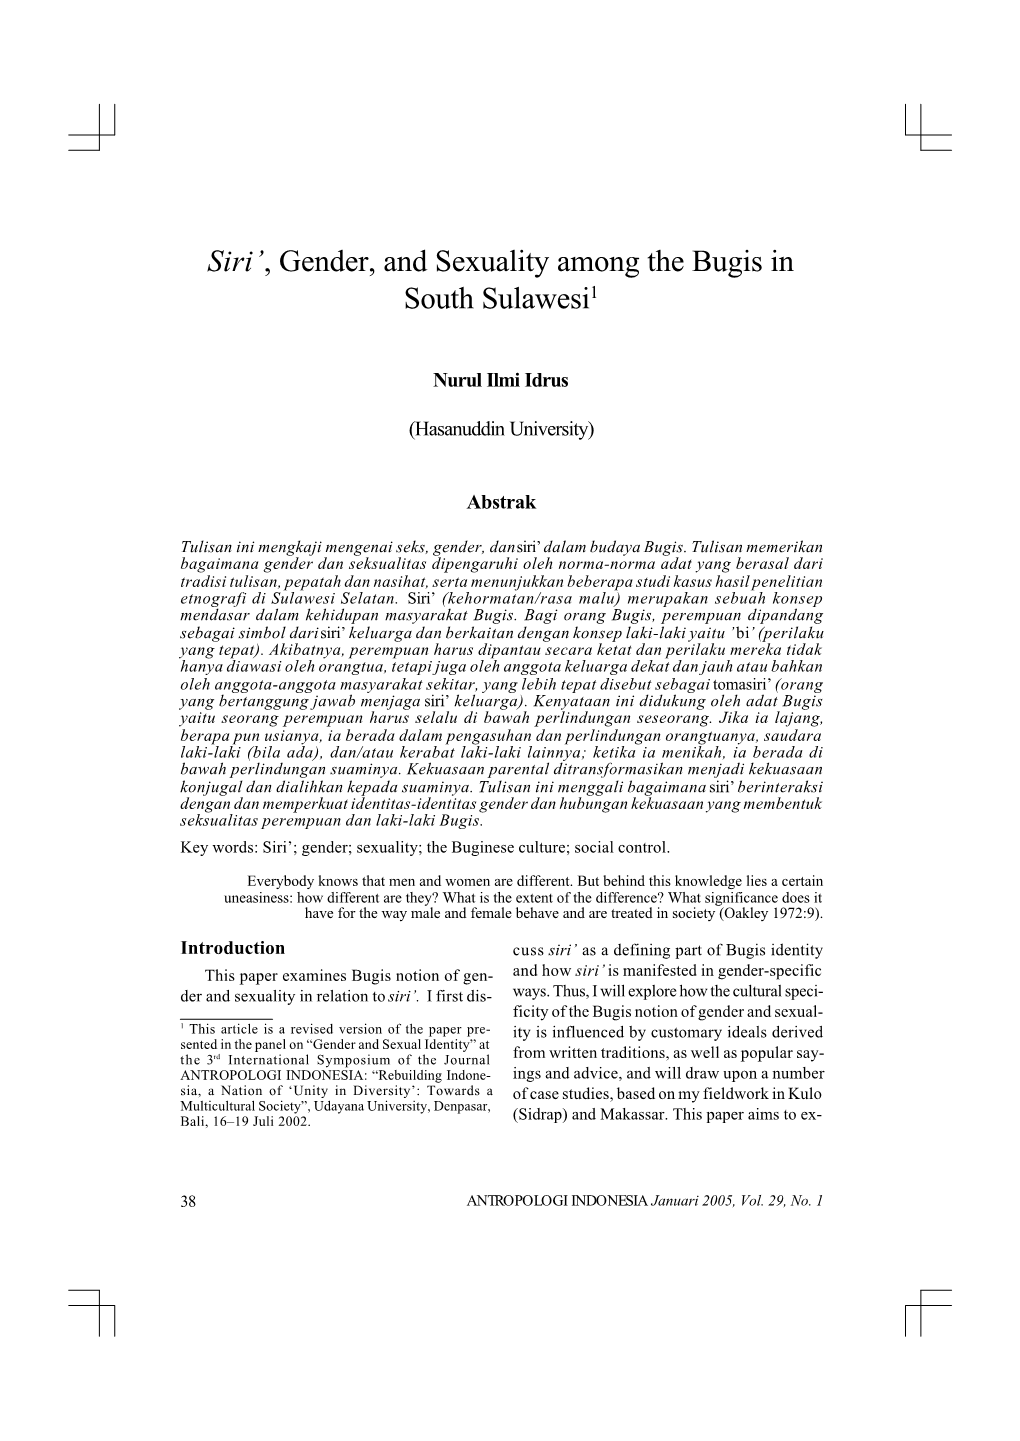 Siri', Gender, and Sexuality Among the Bugis in South Sulawesi1